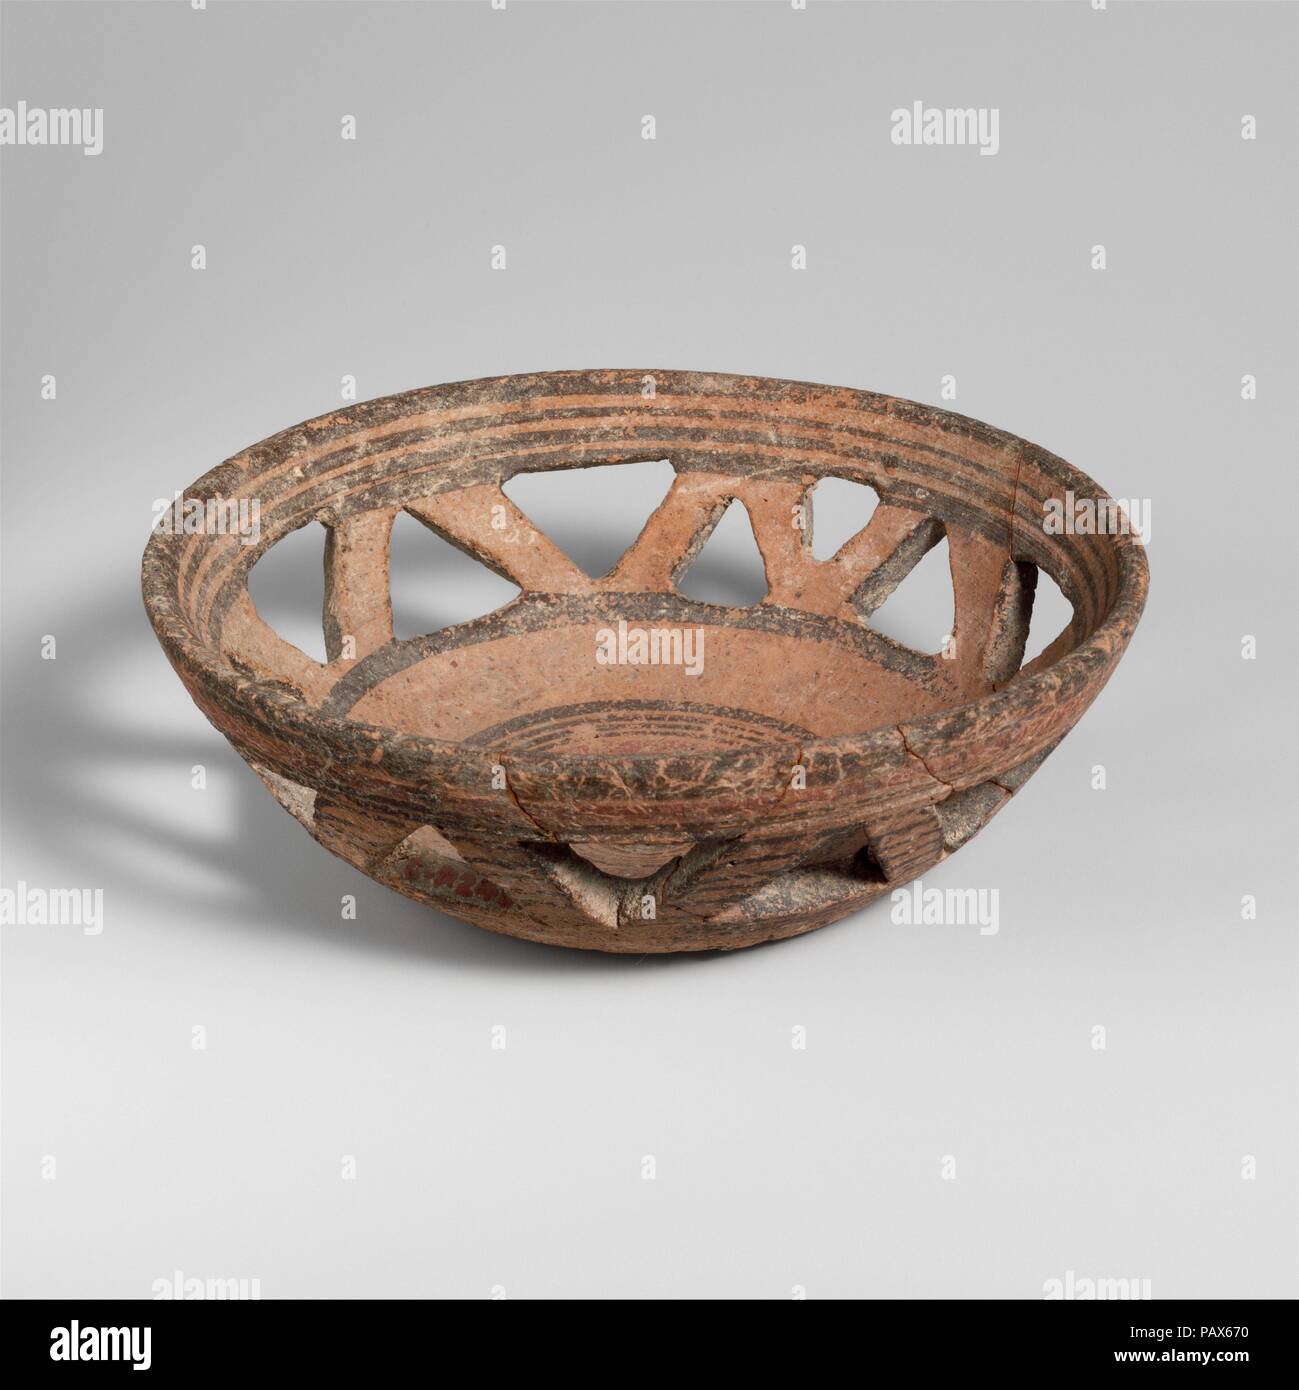 Terracotta basket bowl. Culture: Cypriot. Dimensions: H. 1 15/16 in. (4.9 cm); diameter  5 5/8 in. (14.3 cm). Date: 850-750 B.C..  Decorated with triangular openings and concentric bands in black and red. Museum: Metropolitan Museum of Art, New York, USA. Stock Photo